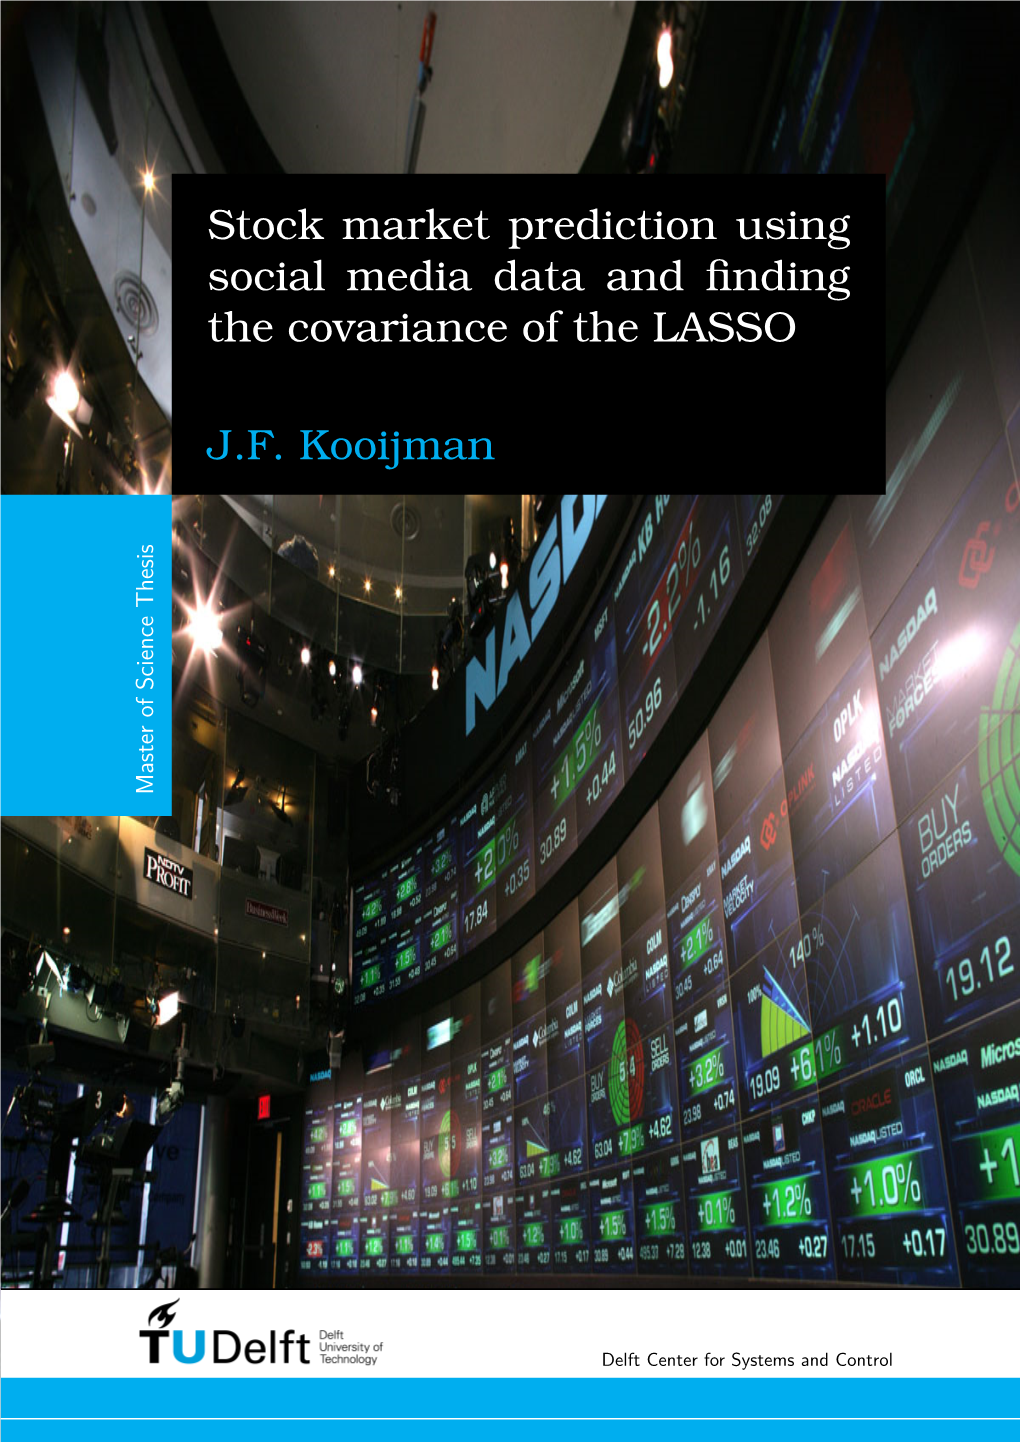 Stock Market Prediction Using Social Media Data and Finding the Covariance of the LASSO